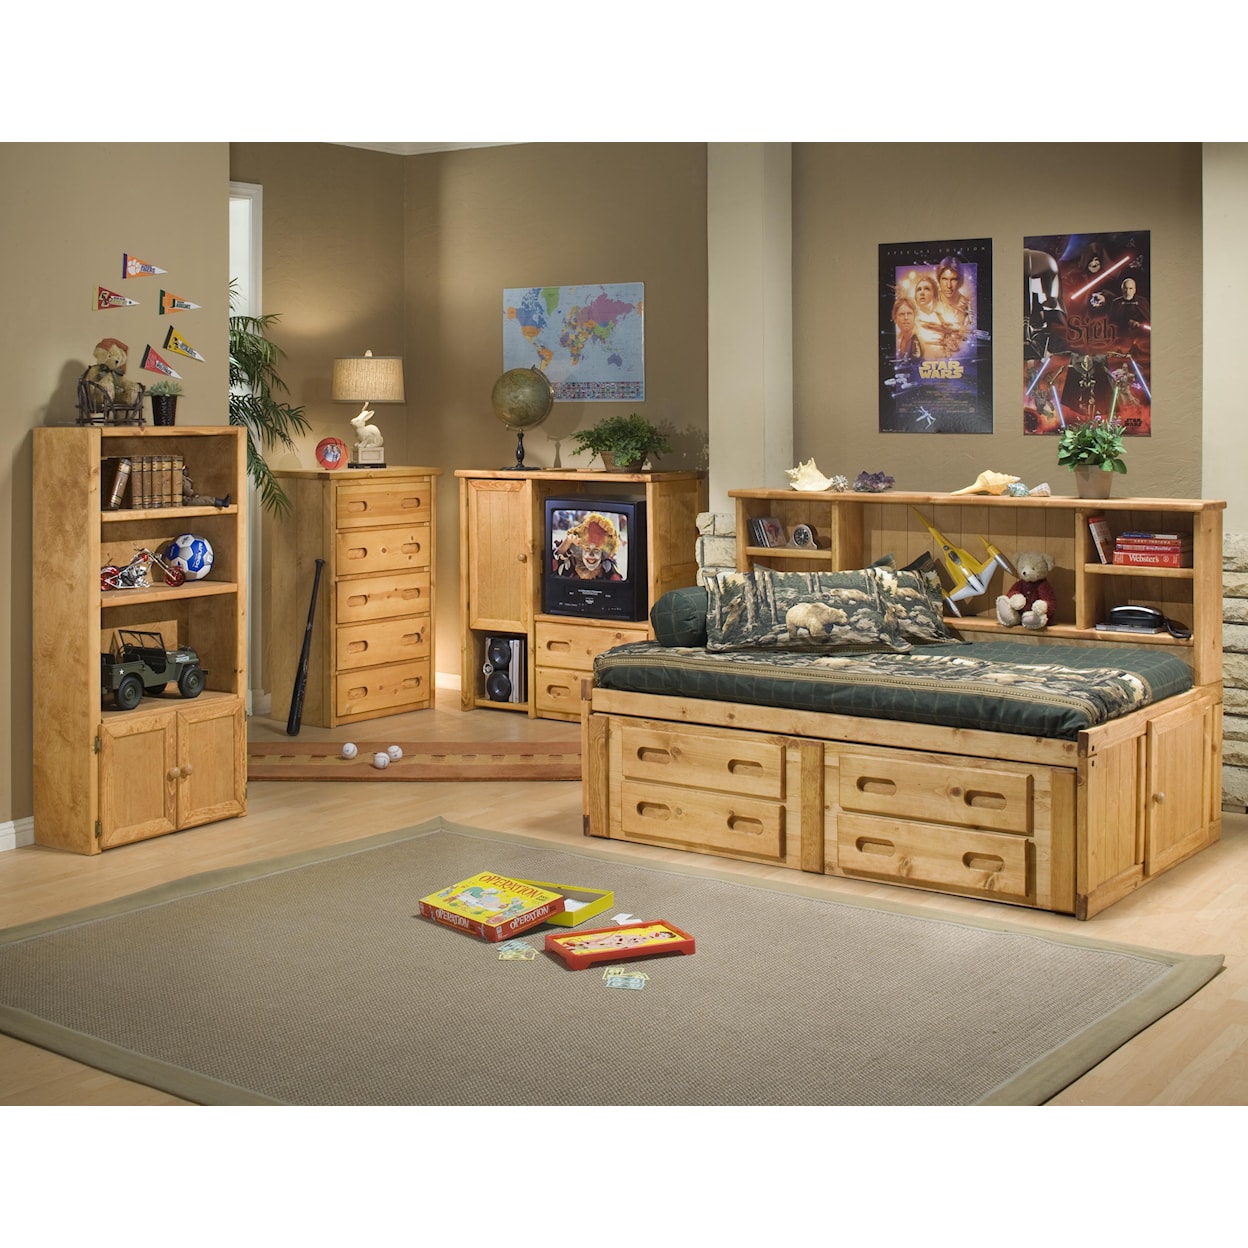 Trendwood Bunkhouse Twin Cheyenne Bookcase Bed with Trundle